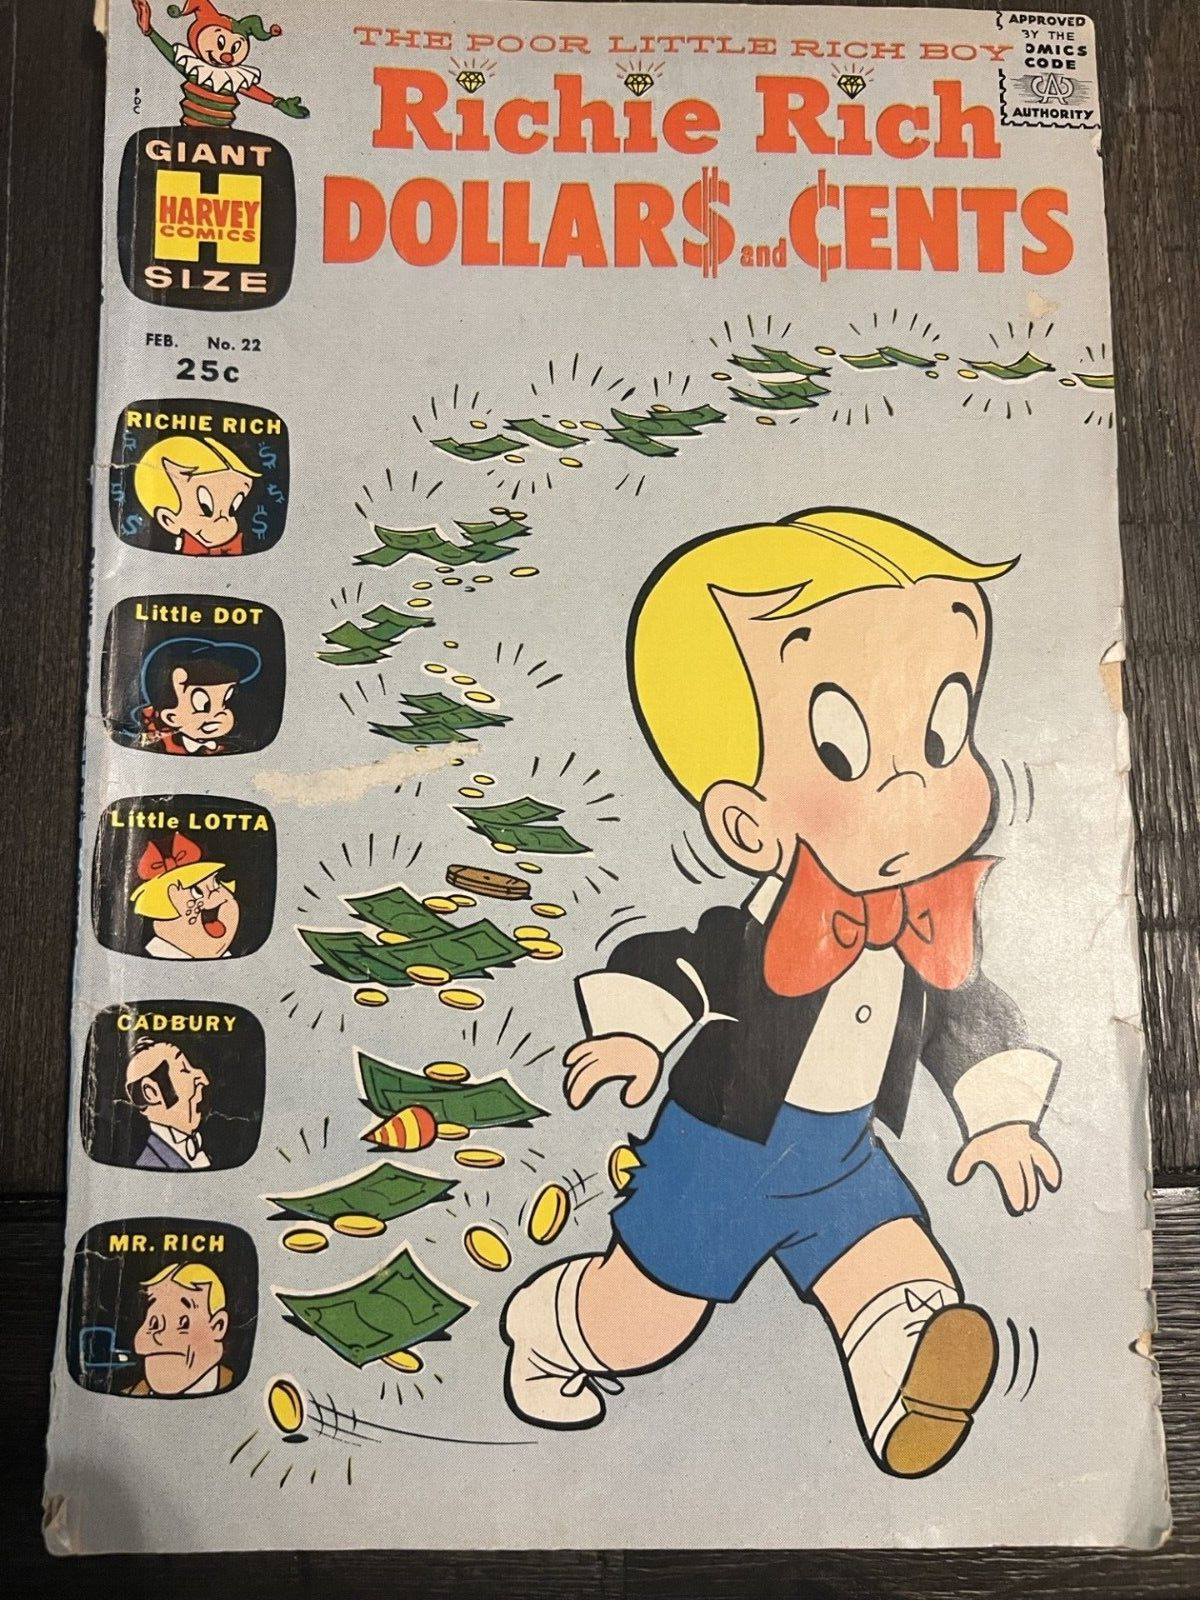 Richie Rich Dollars and Cents Vol #1 Issue #22 Comic Book February 1968